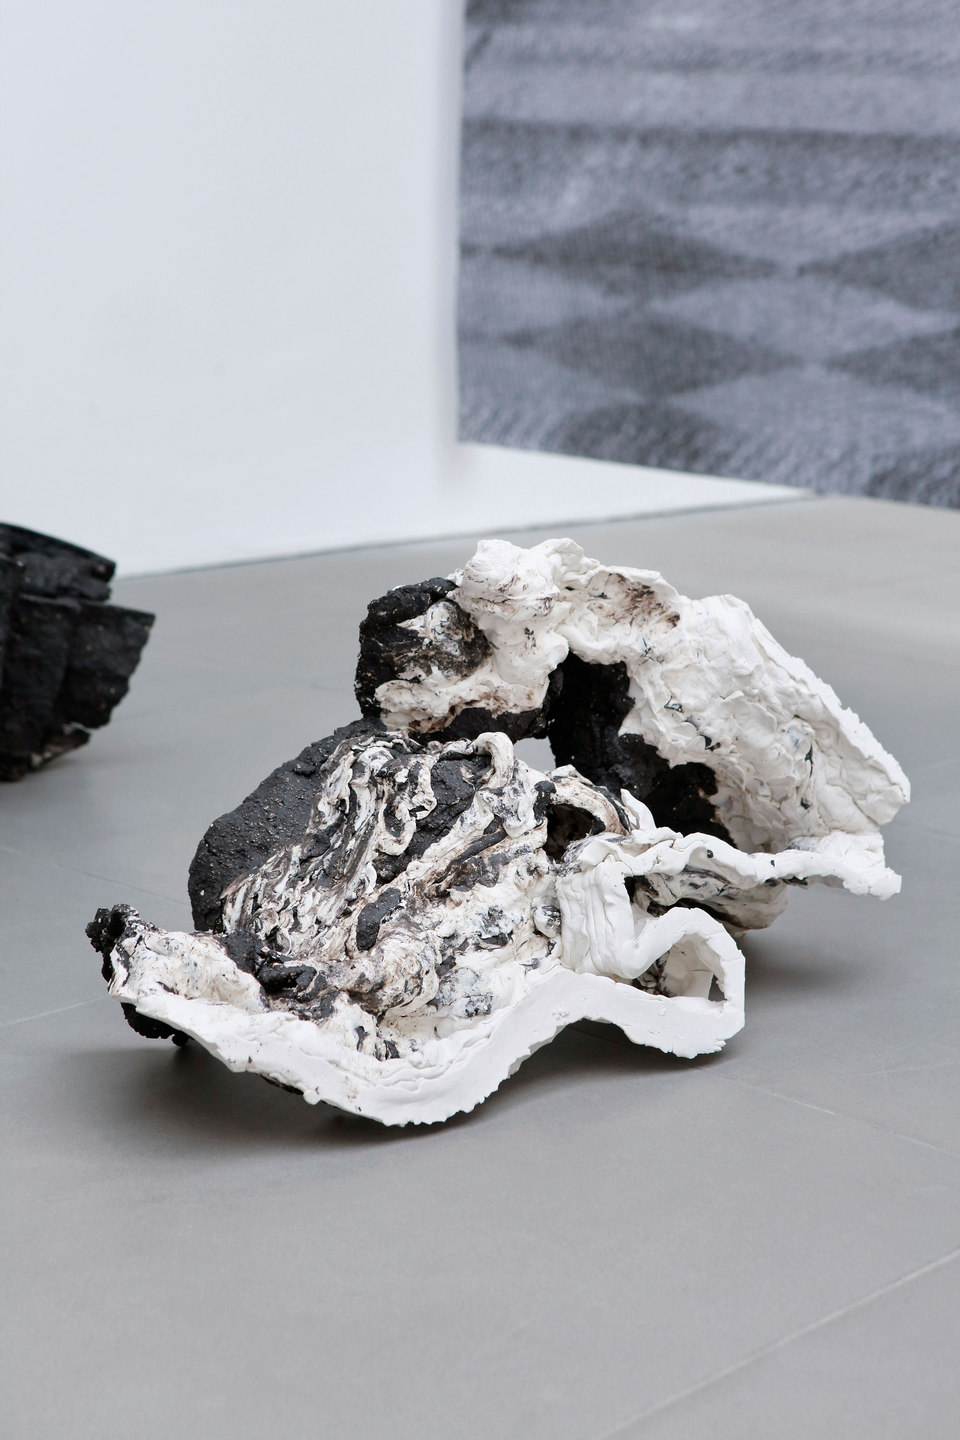 Peles Empire, Formation, 'formation 5', 2013, unglazed porcelain with black grog, h. 60 x w. 29 x d. 32 cm, Cell Project Space